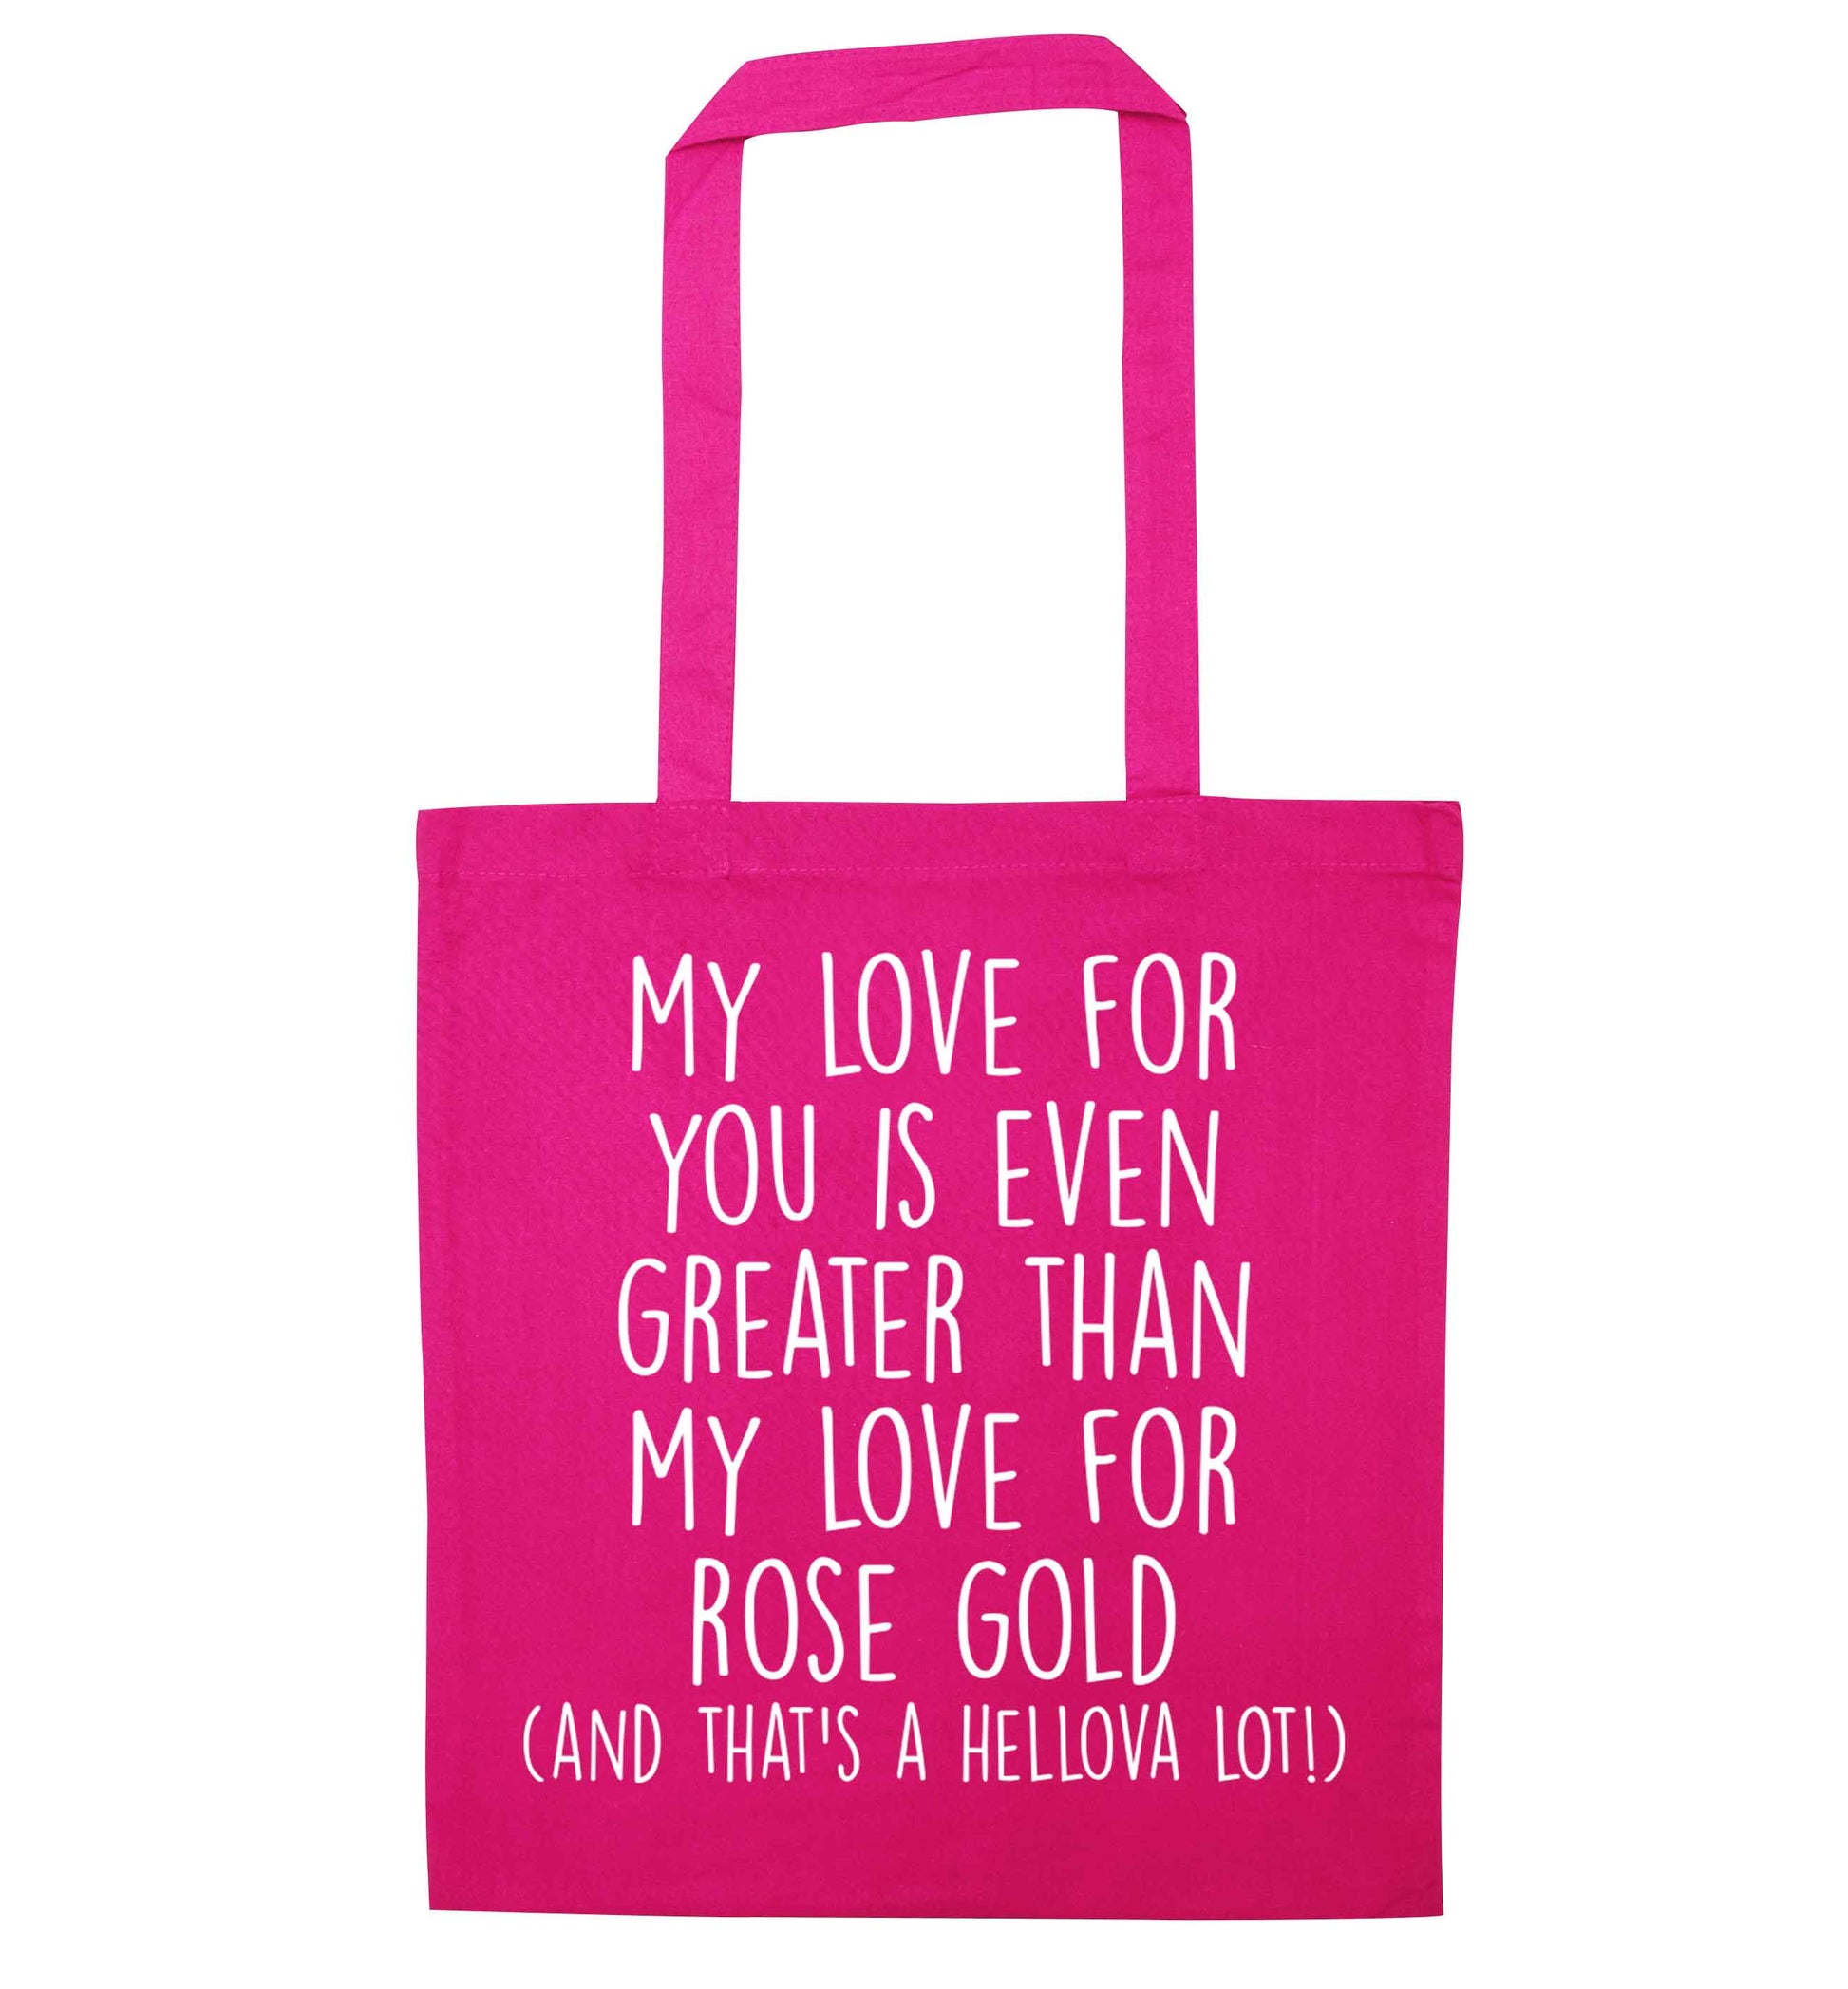 My love for you is even greater than my love for rose gold (and that's a hellova lot) pink tote bag